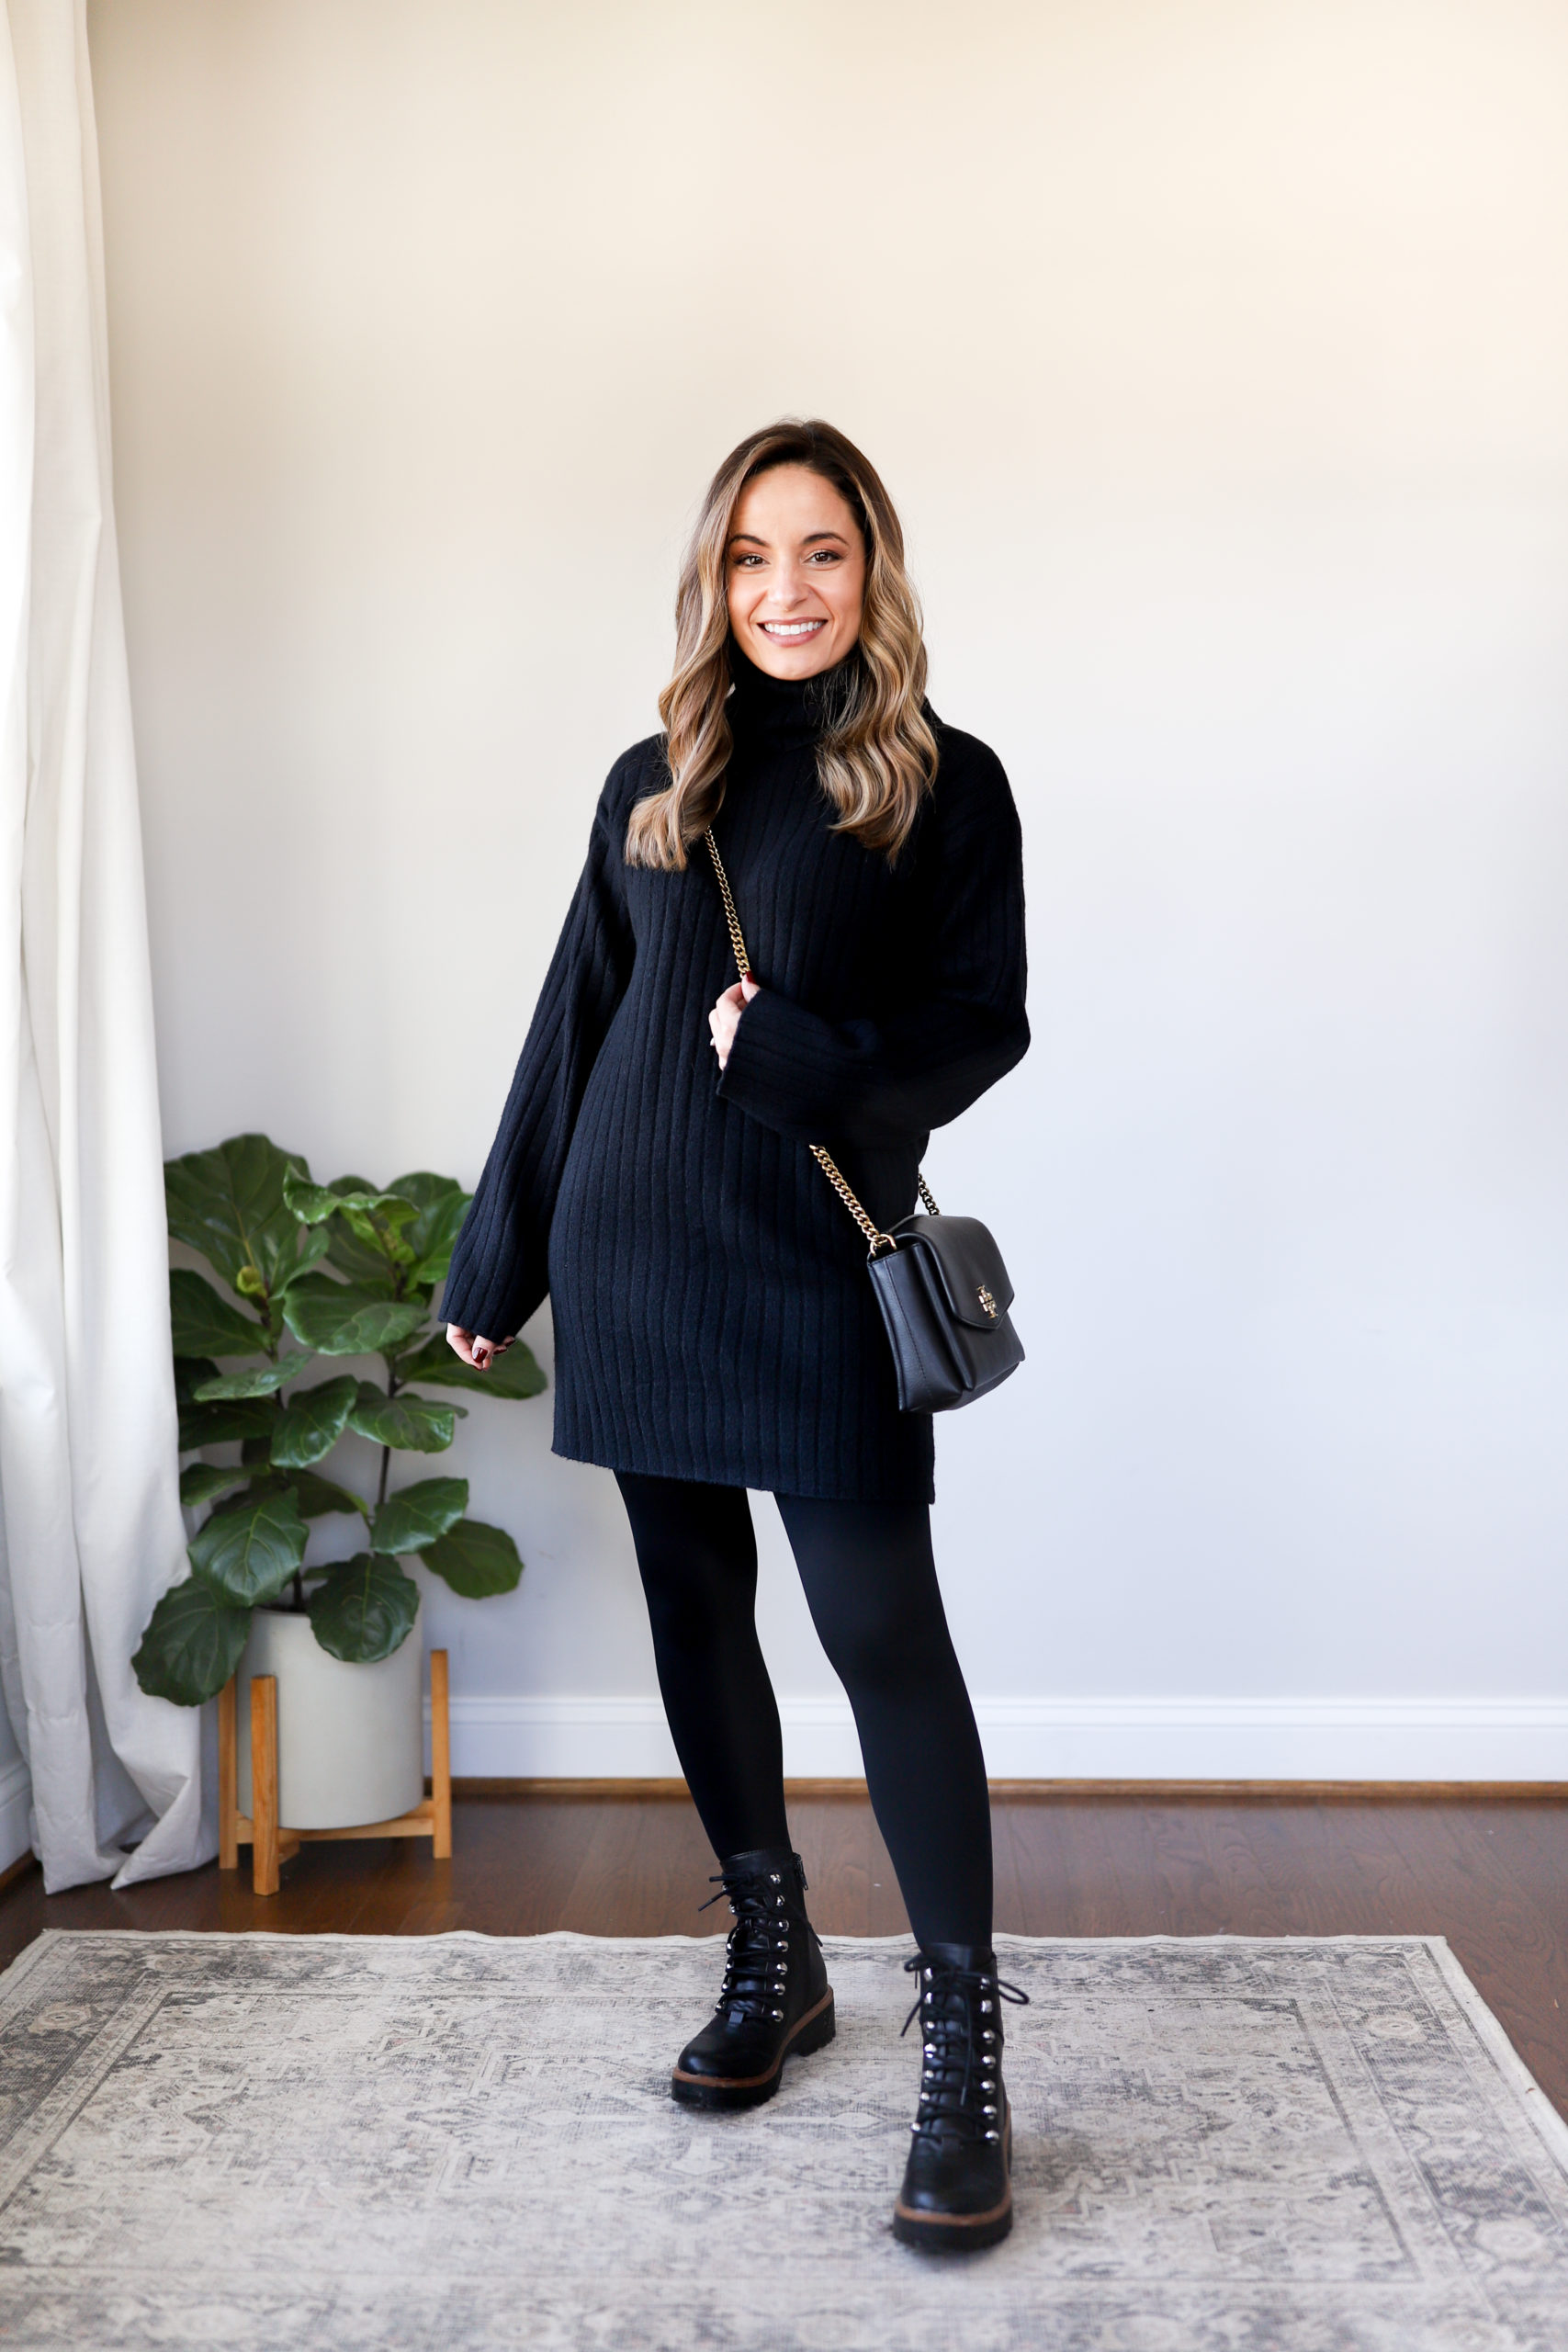 Black Leggings with Sweater Dress Outfits (12 ideas & outfits)